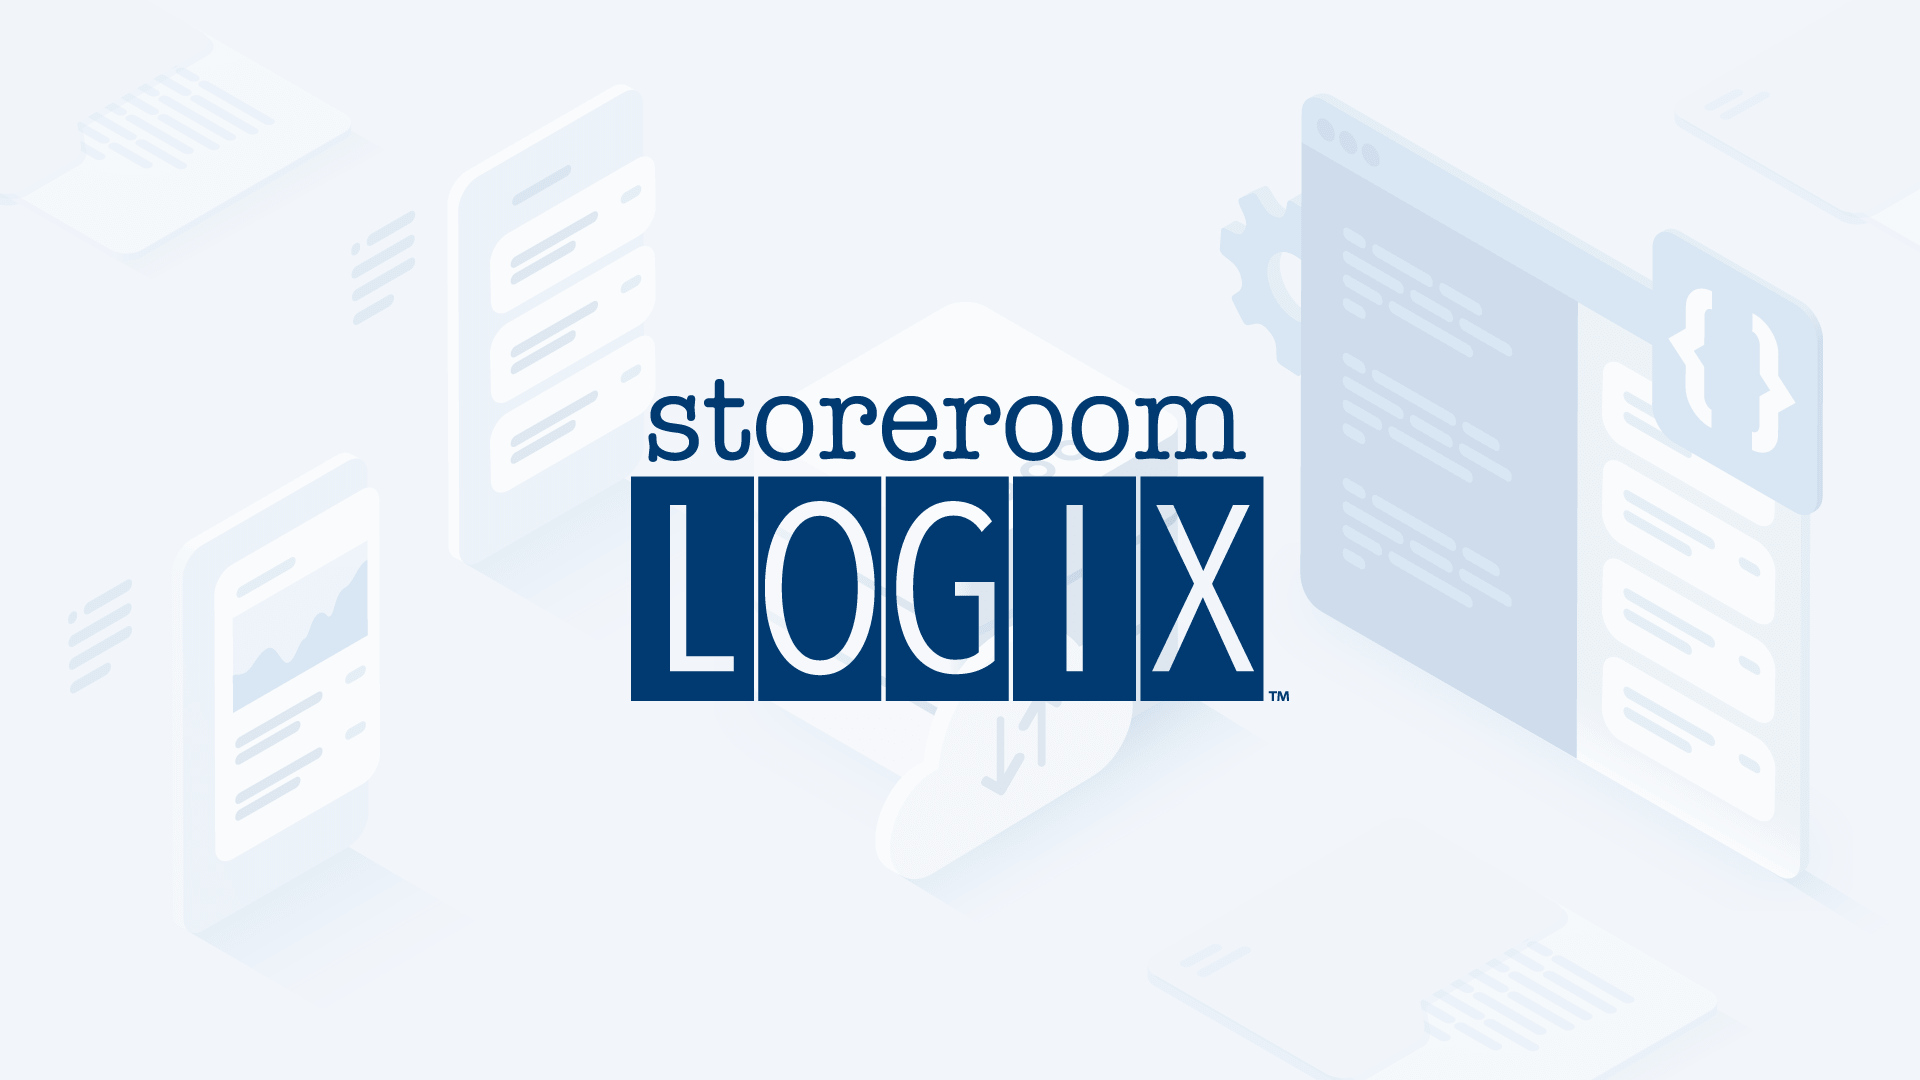 Storeroom Logix — How we helped to create the most advanced VMI platform in the world